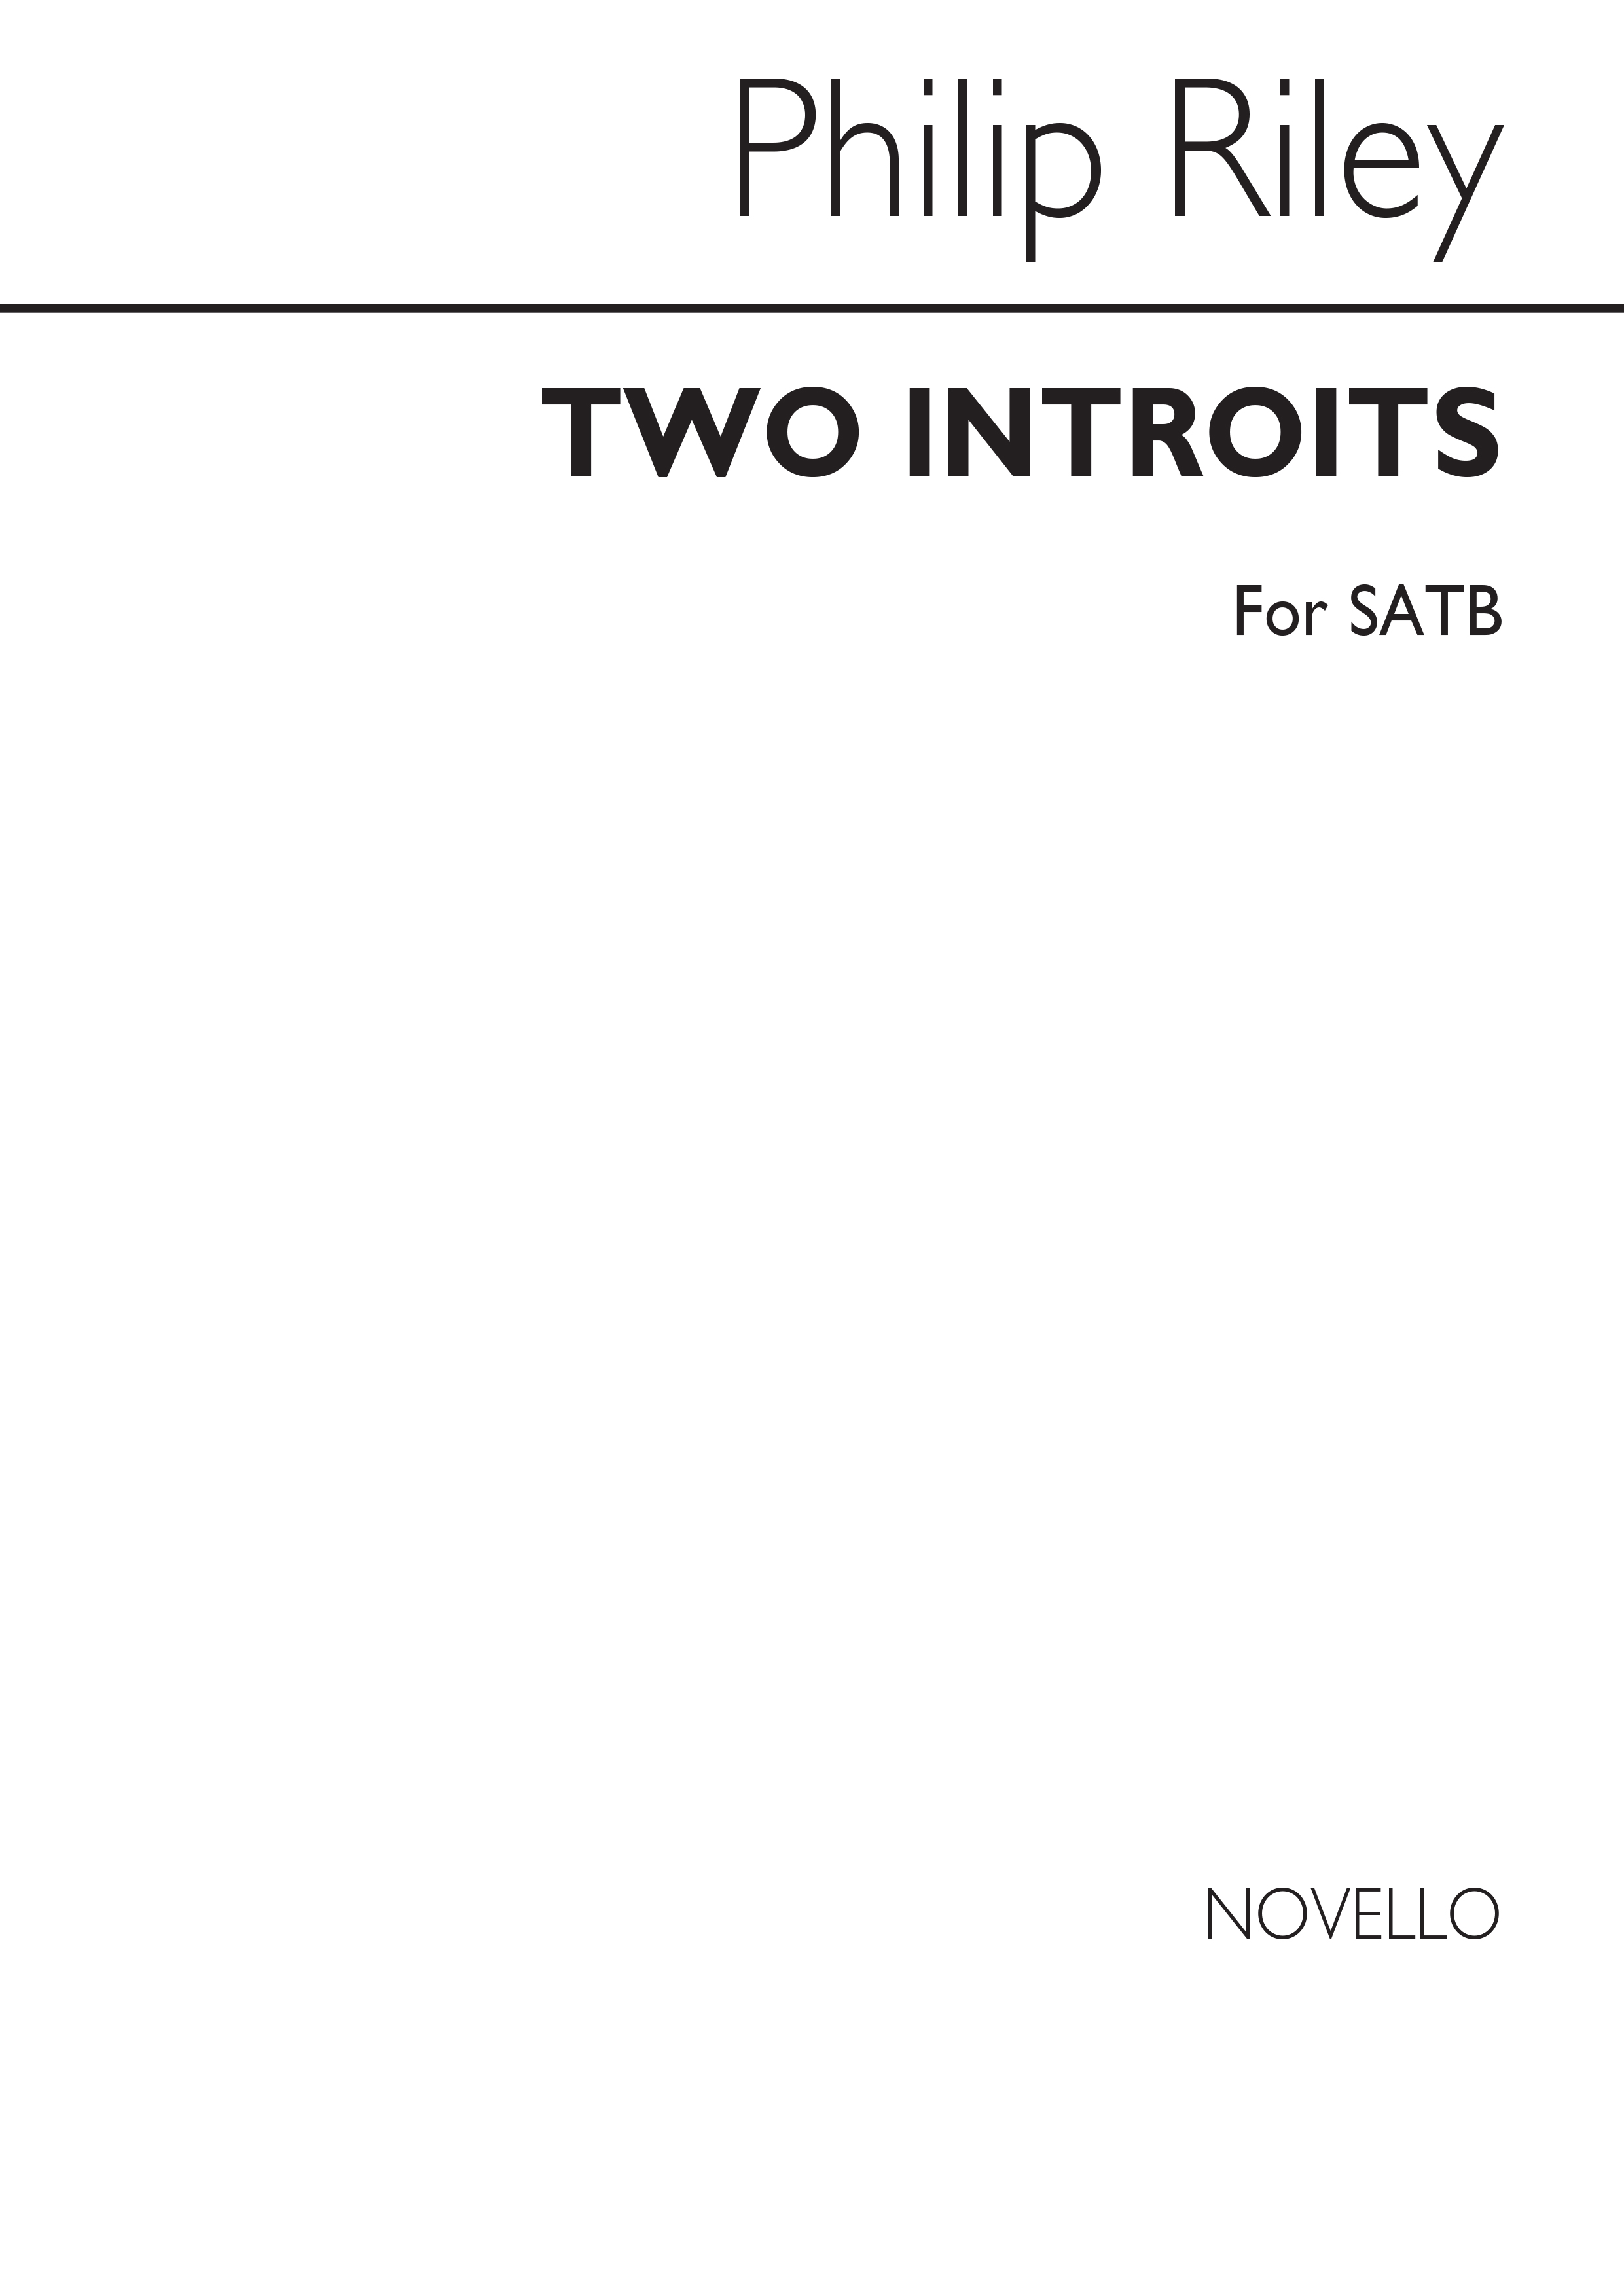 Riley: Two Introits for SATB Chorus